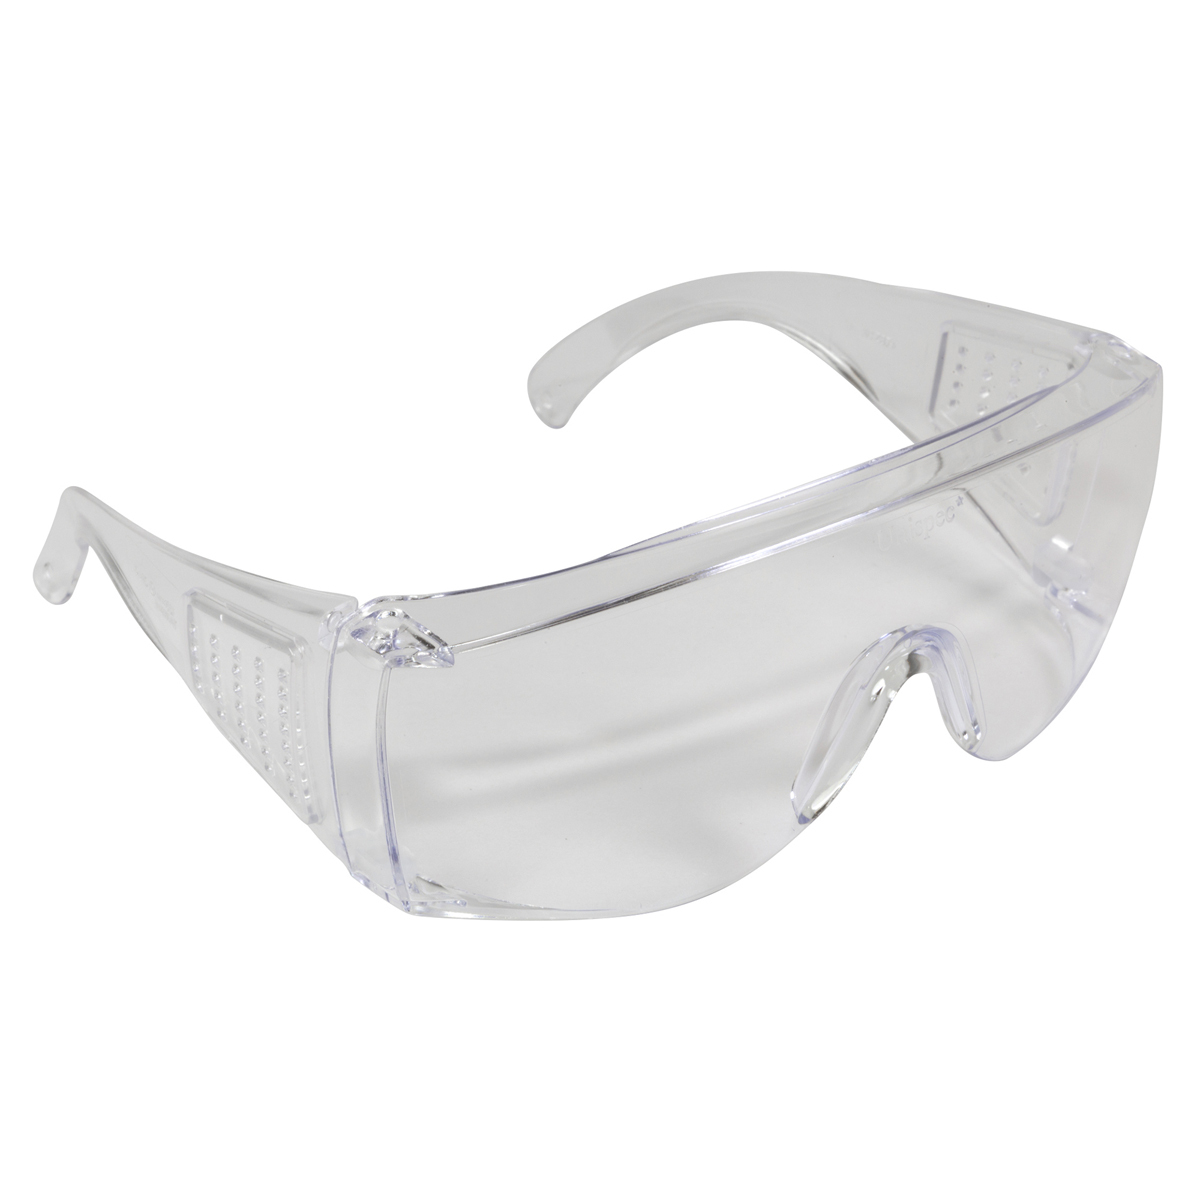 Kimberly-Clark Professional* KleenGuard™ Unispec* II Clear Safety Glasses With Clear Hard Coat Lens (Availability restrictions a